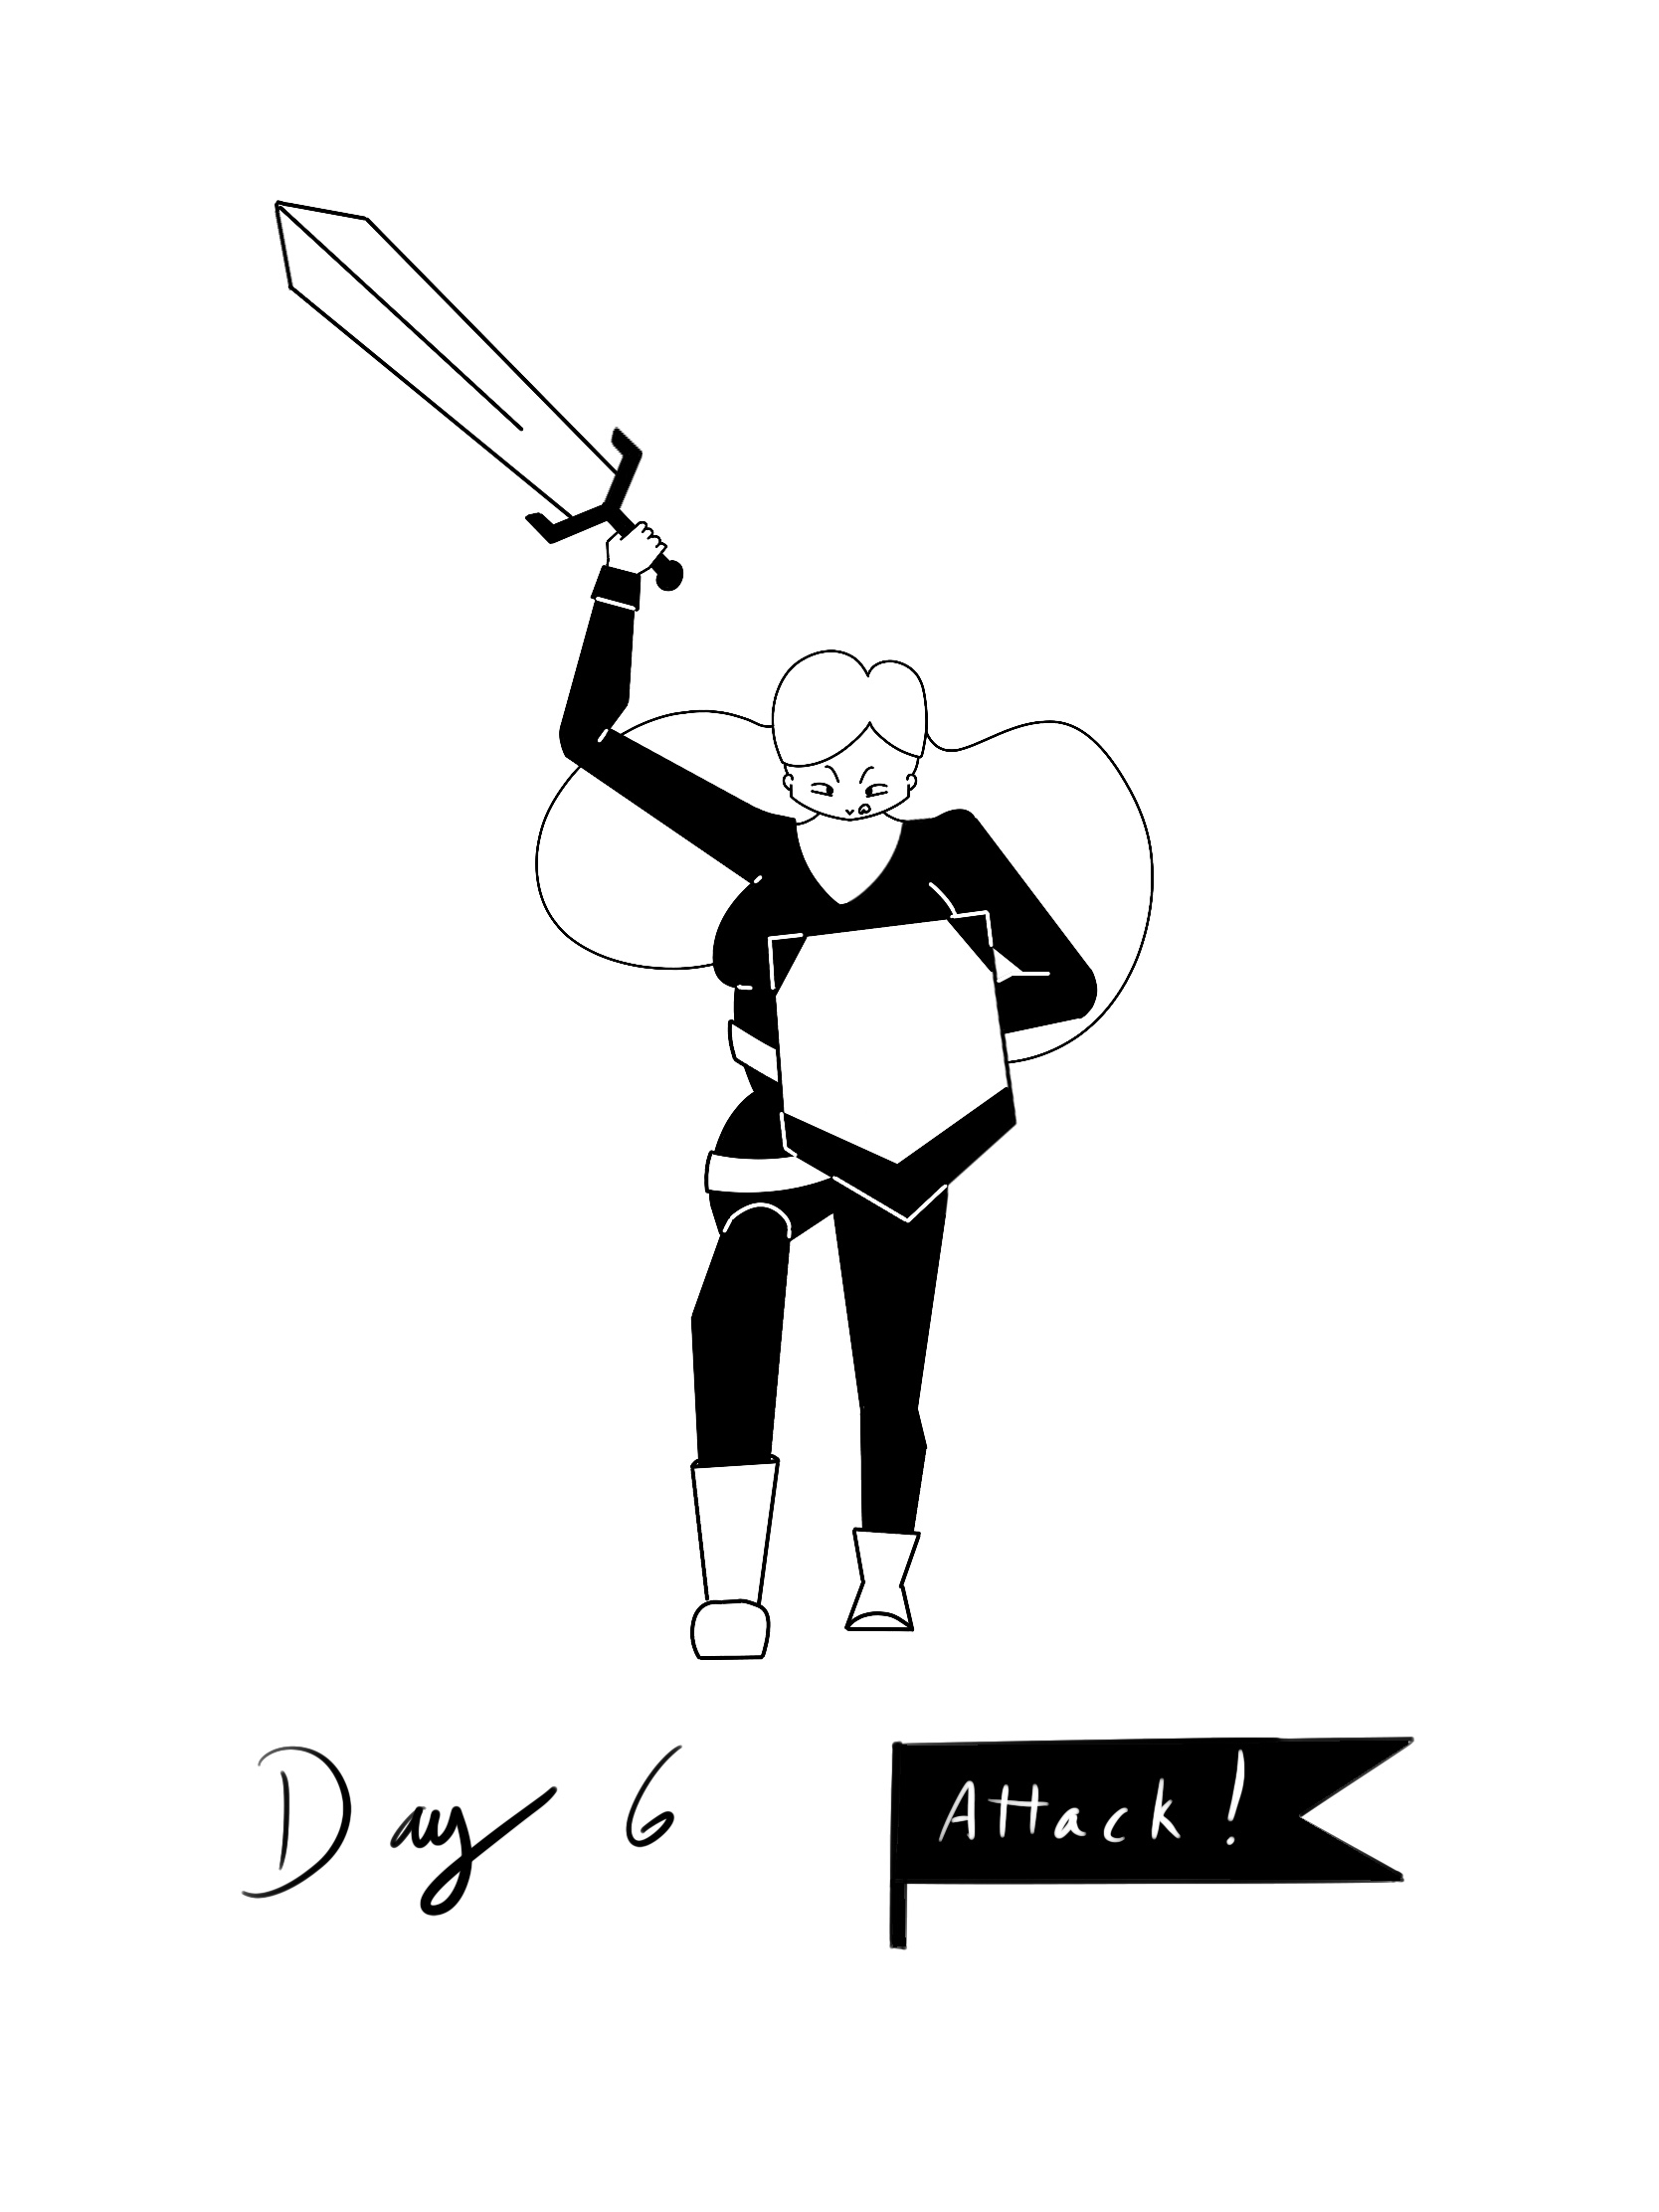 Day 6 - Attack